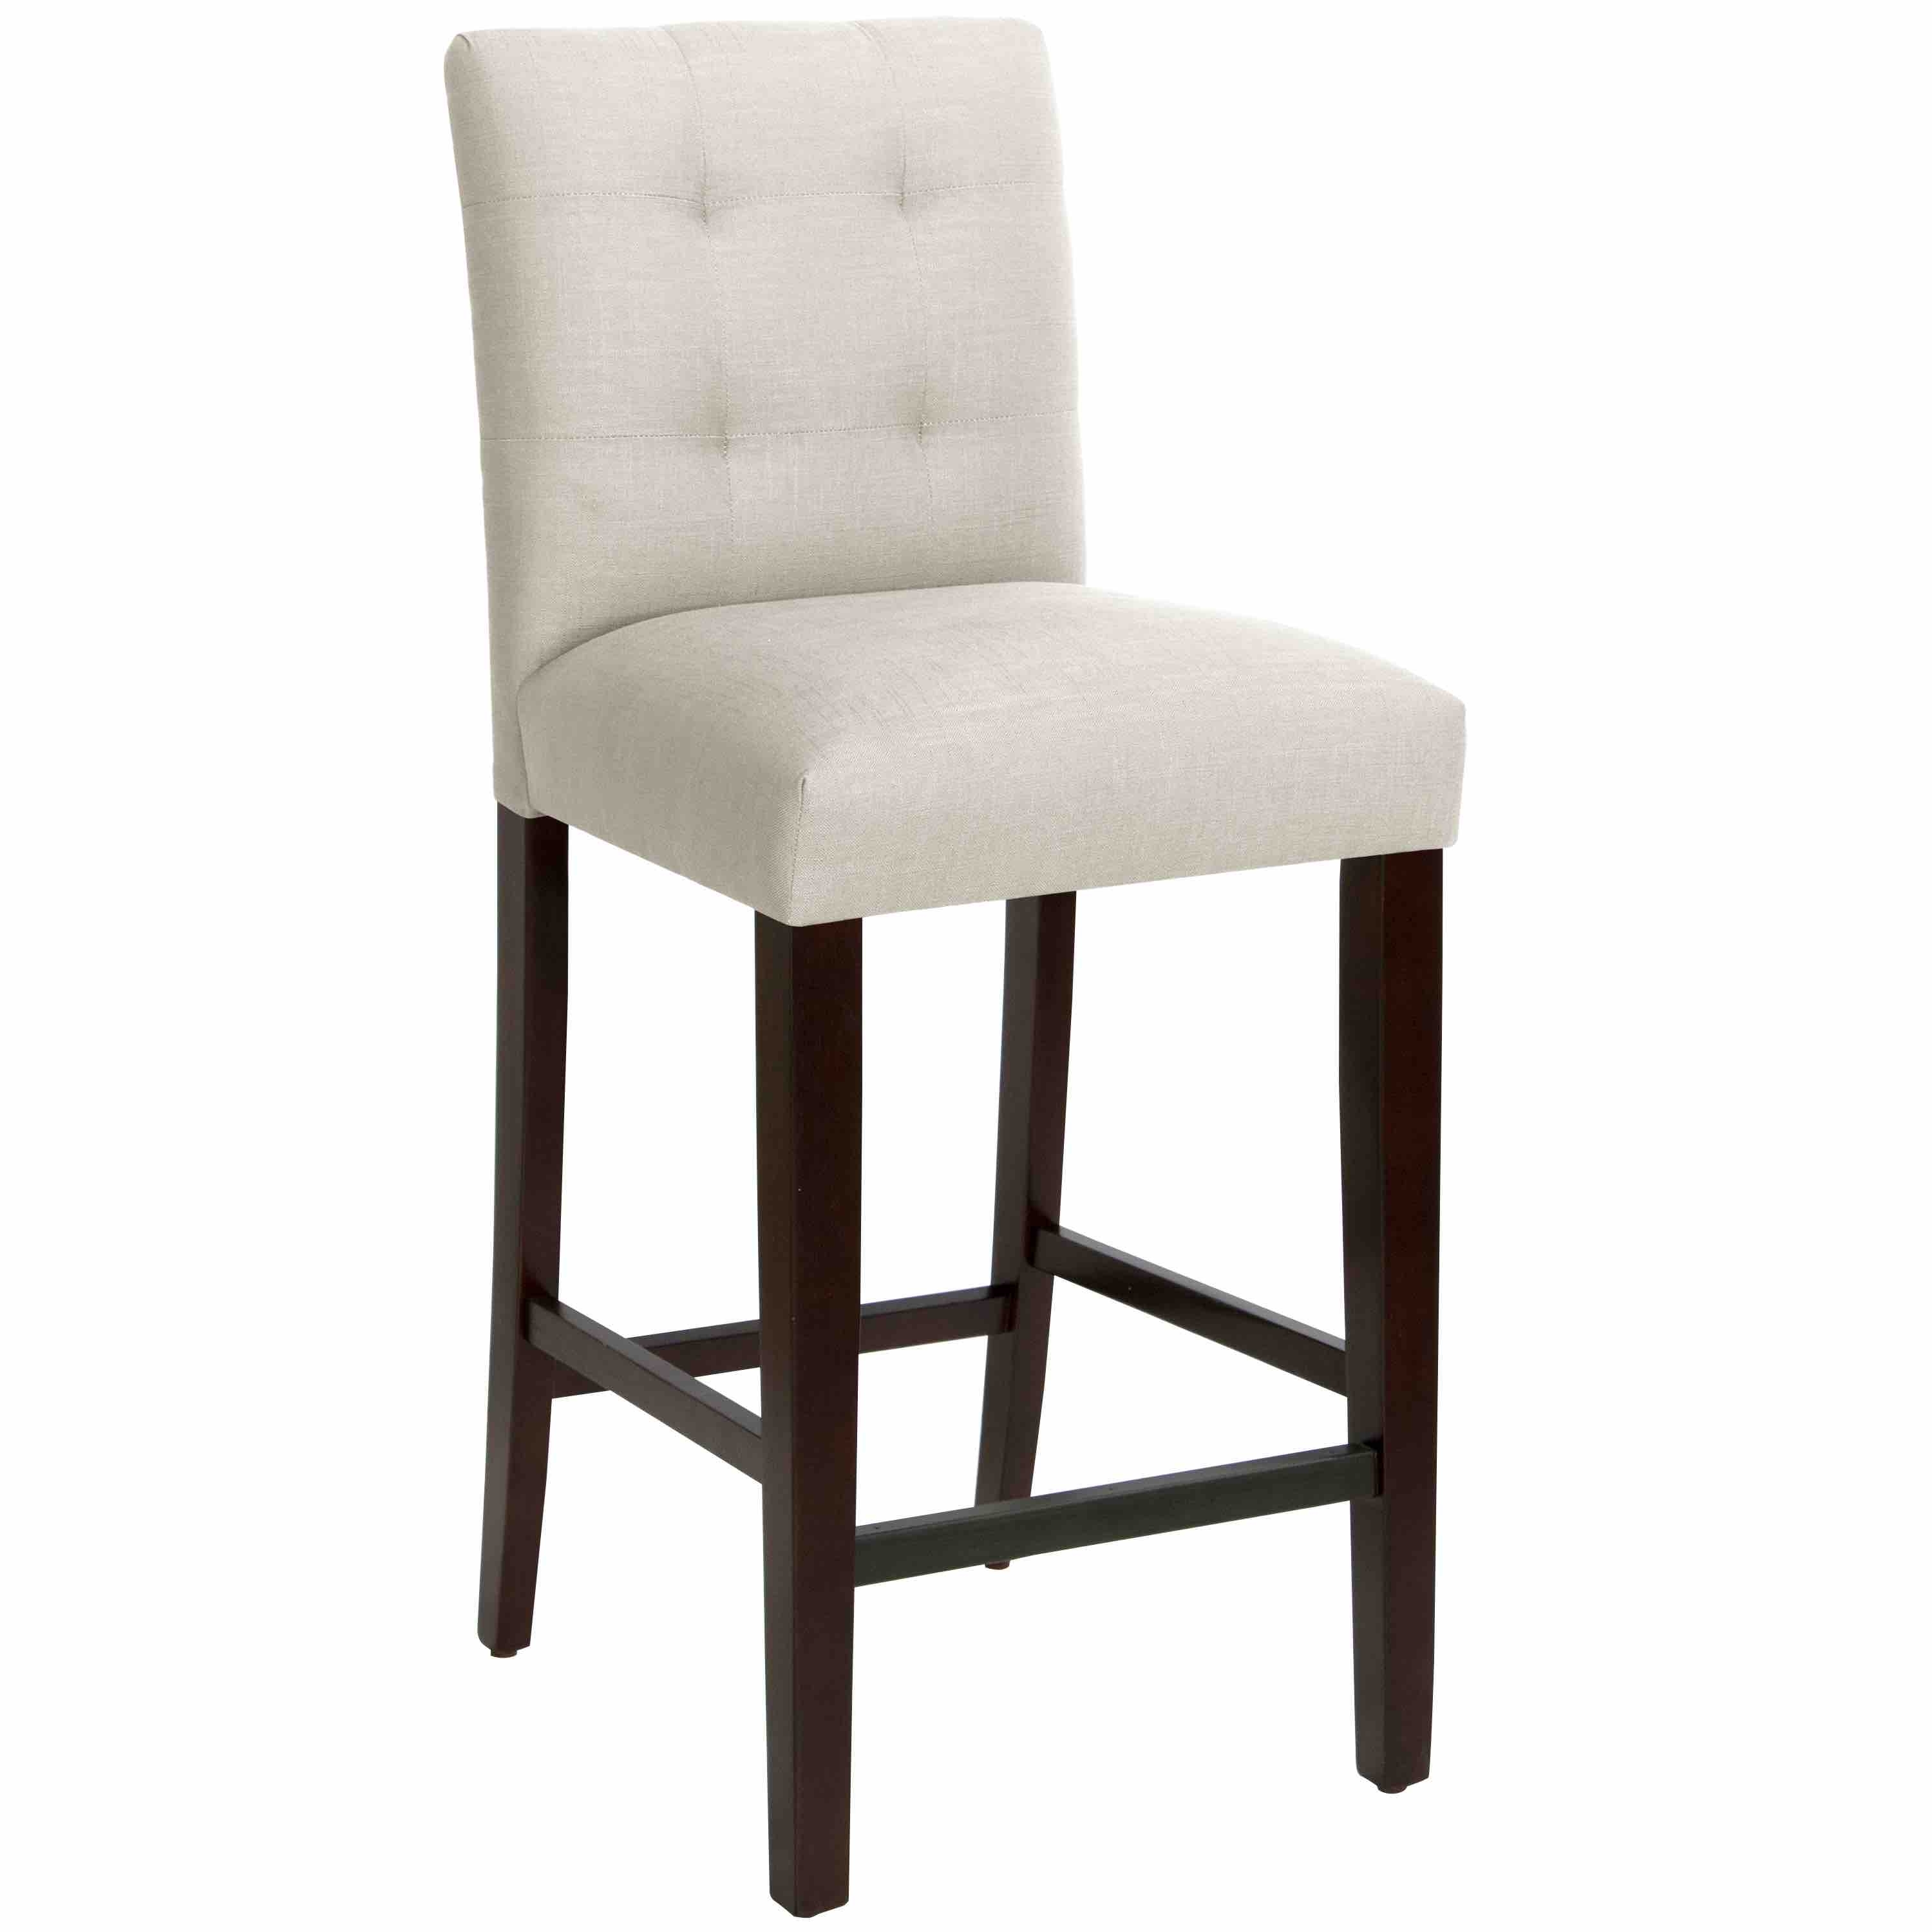 Dining Chair in Linen Talc - Image 0